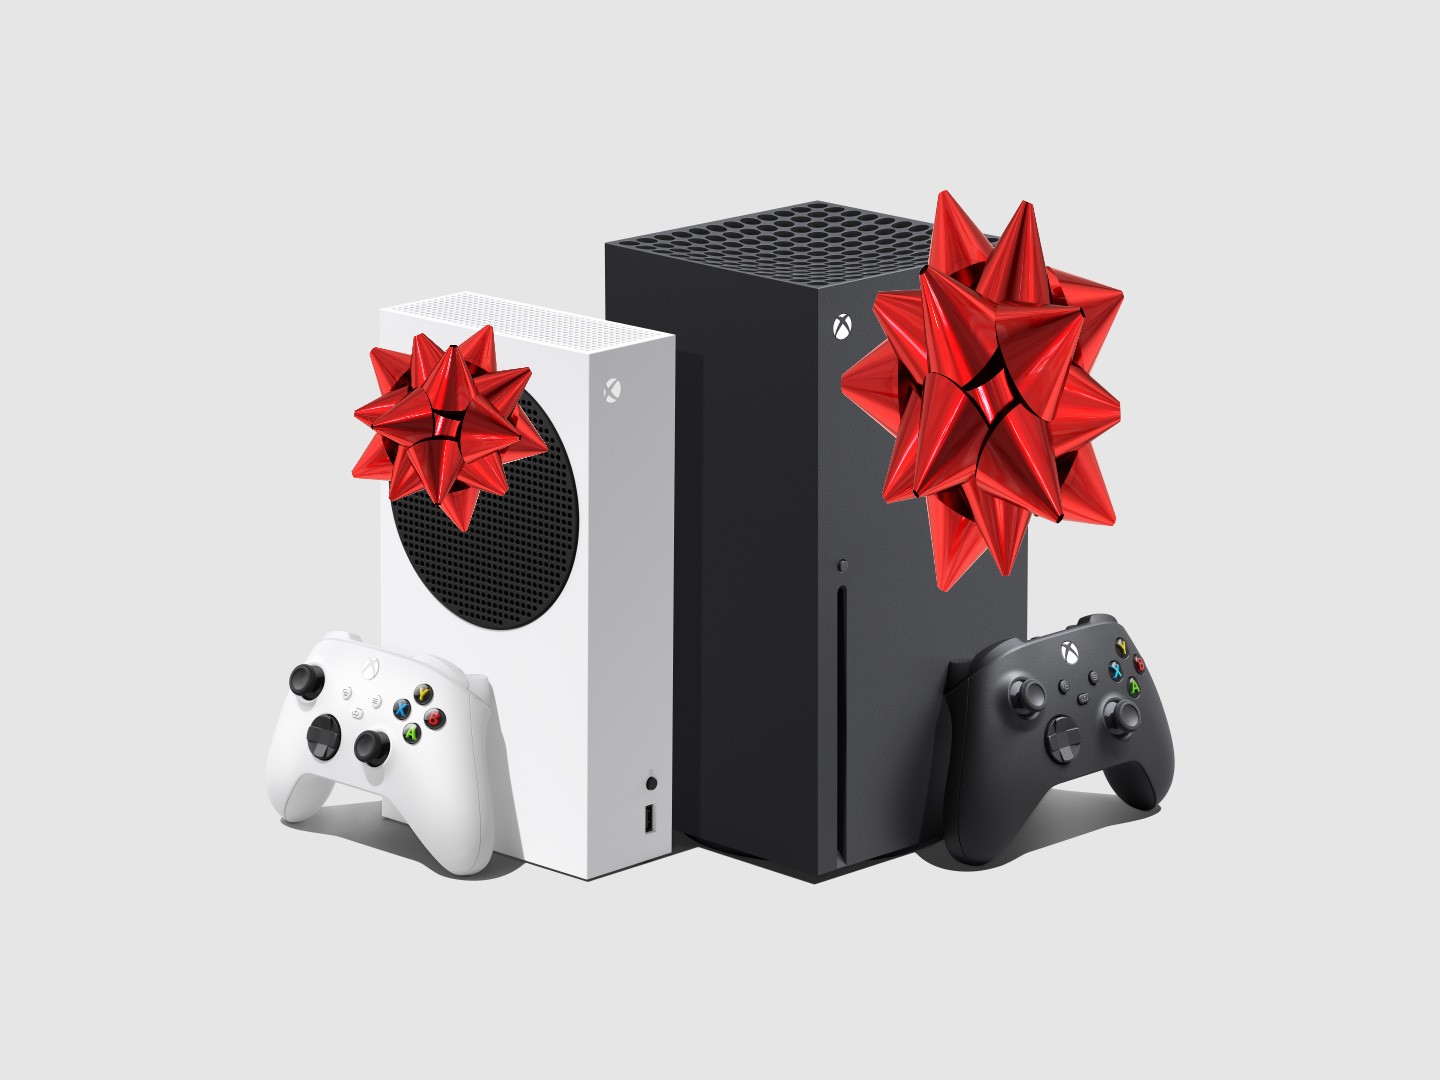 A photo shows the Xbox Series S and Xbox Series X positioned next to each other and upright, with a controller in front of each console. Clip art of a red gift bow has been added to the front of each console to indicate they are gifts